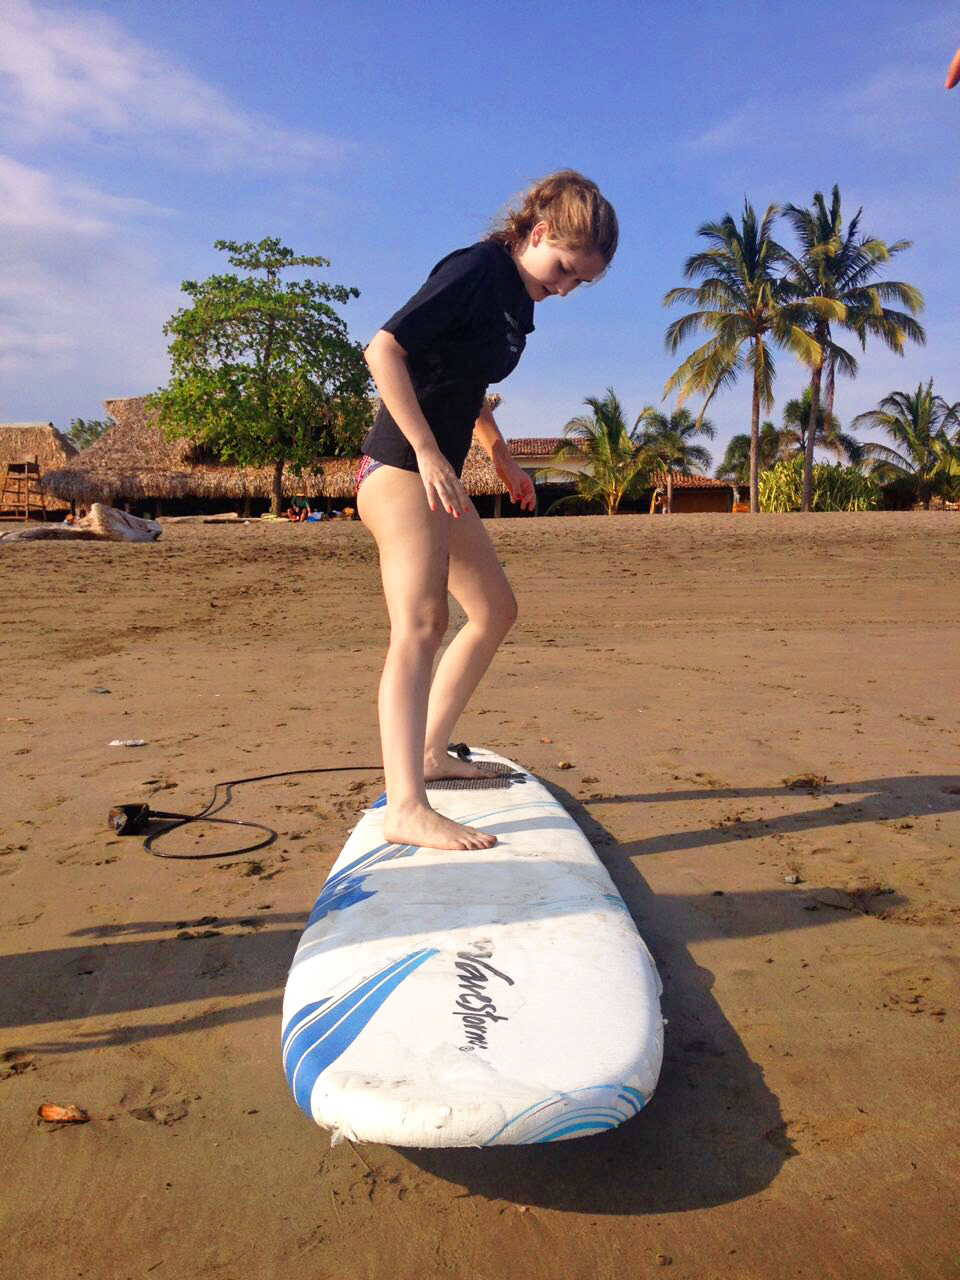 Surfing at Playa Venao